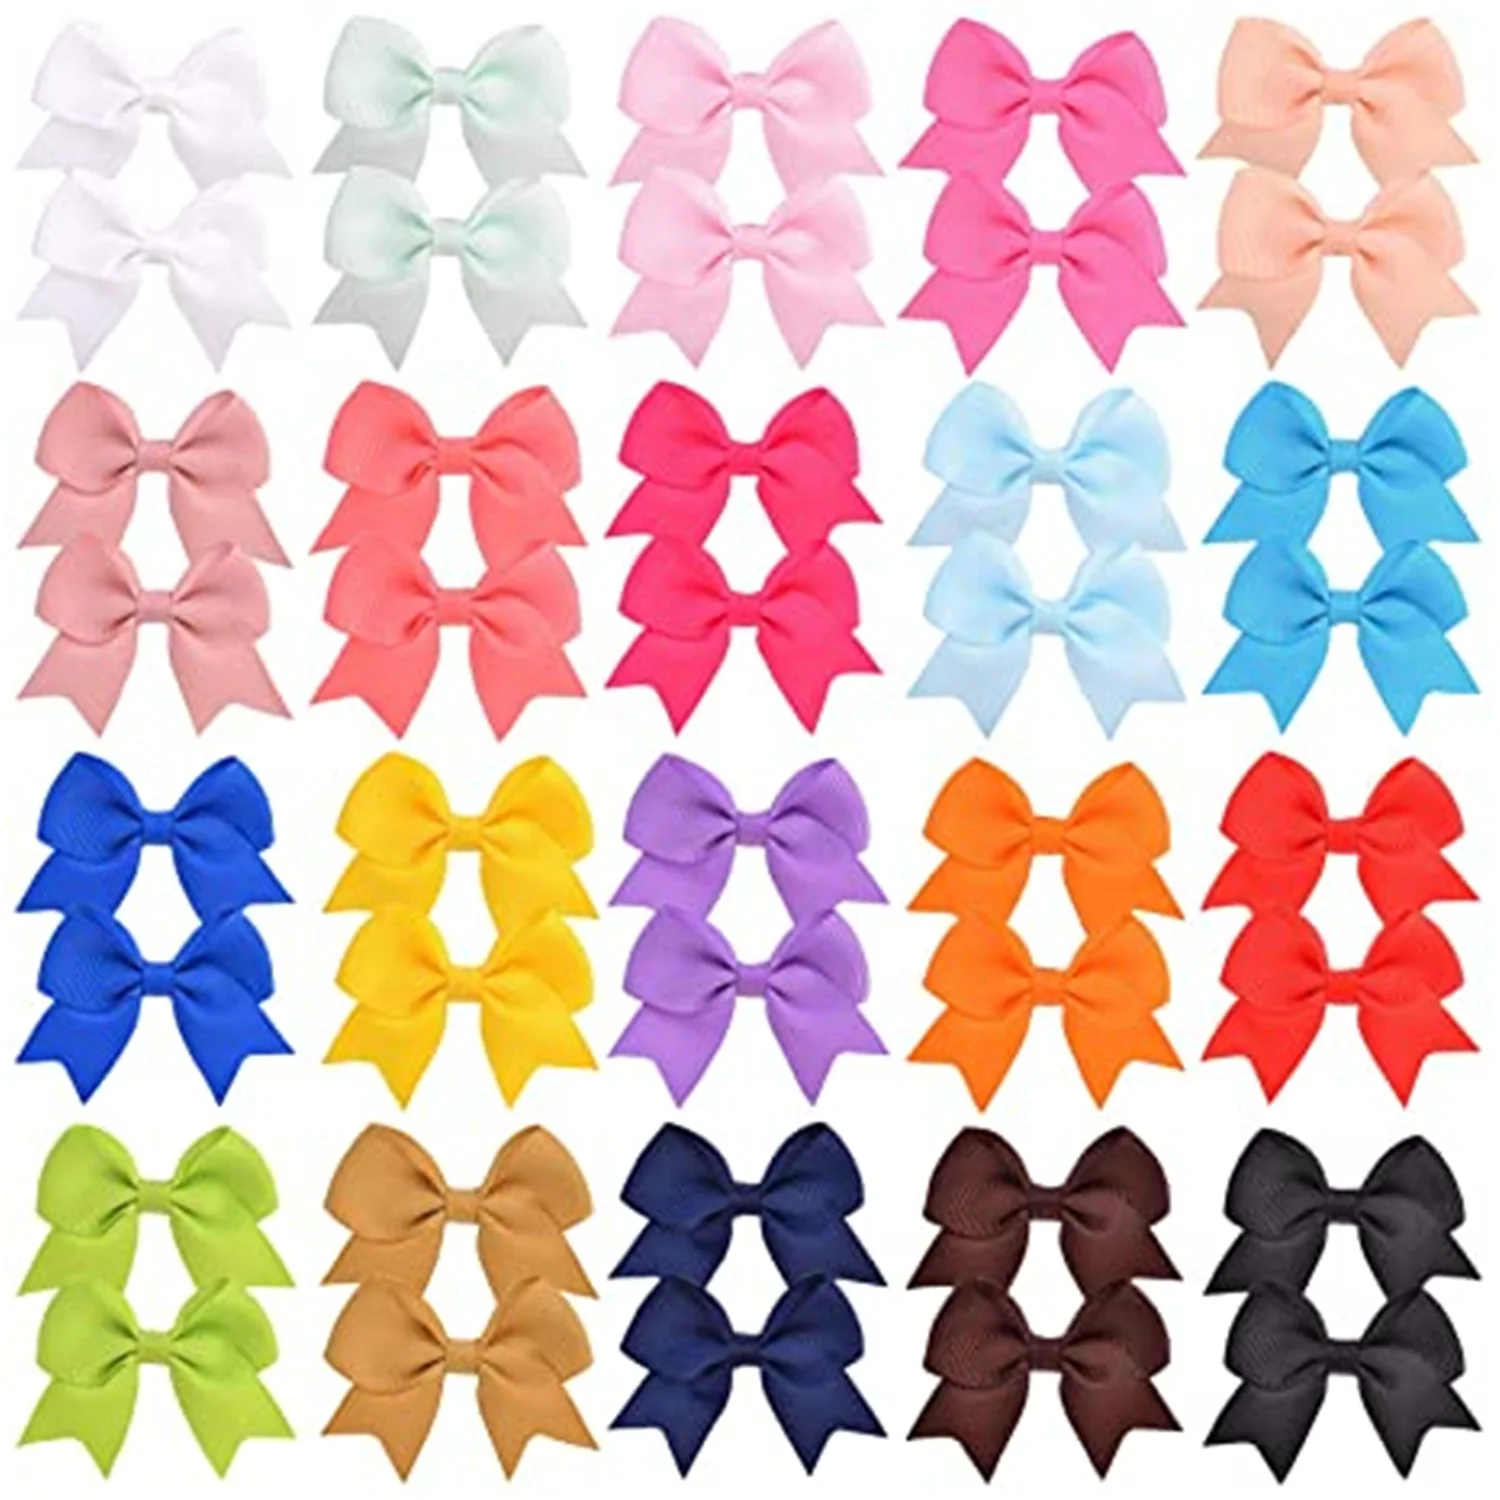 

20Pieces 2.4 inches Boutique Grosgrain Ribbon Bow Baby Girls Hair Bows Clips Pinwheel Barrettes For Babies Kids Toddlers Teens